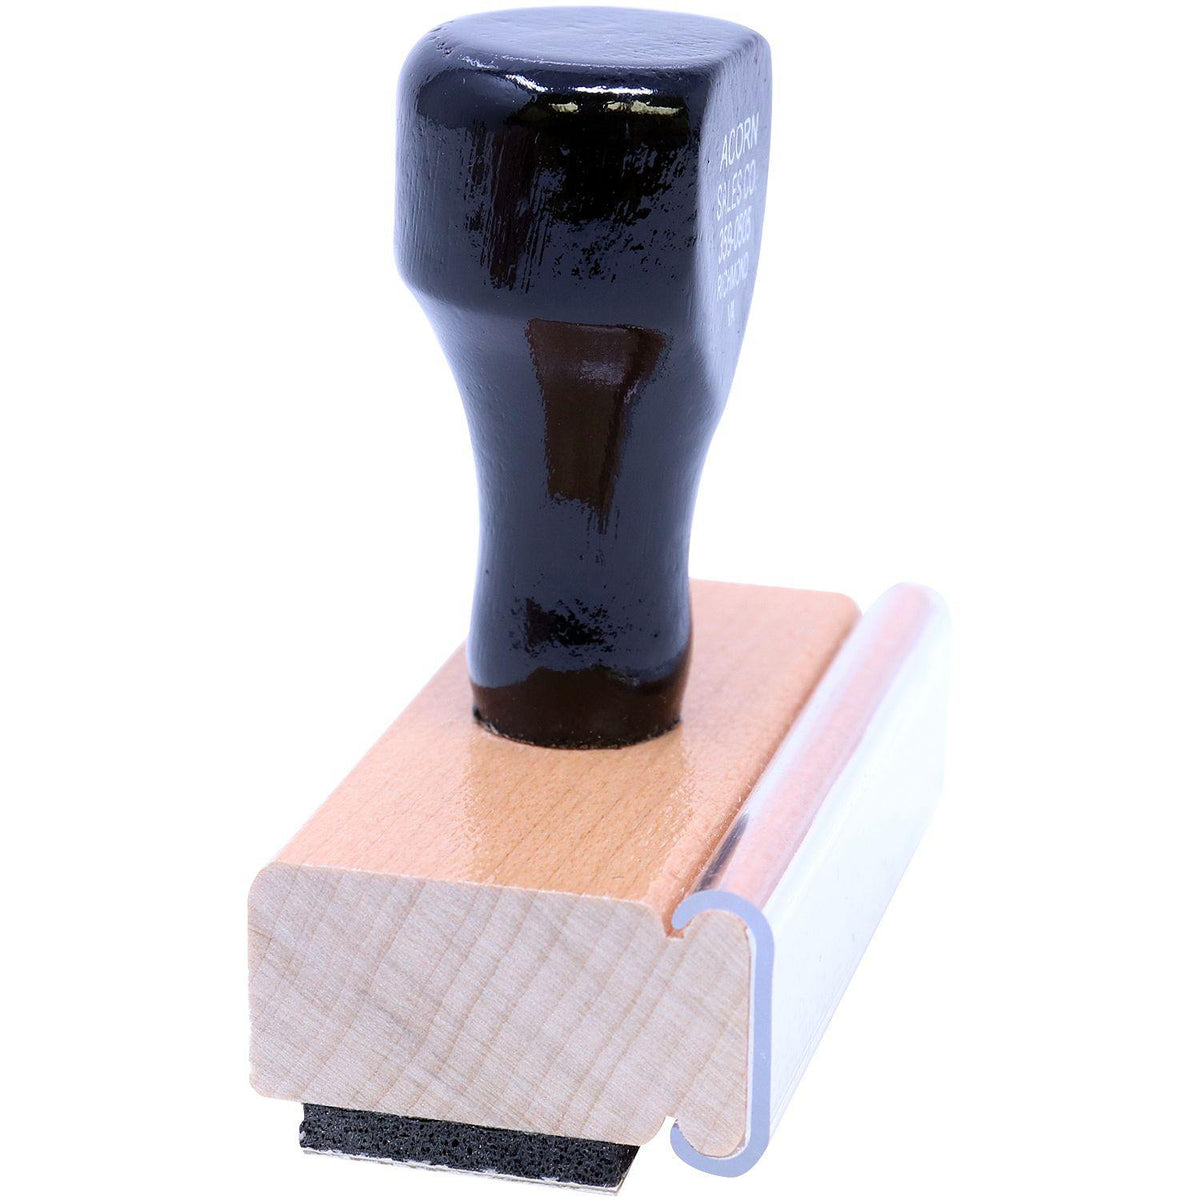 Side View of Large Community Property Rubber Stamp at an Angle